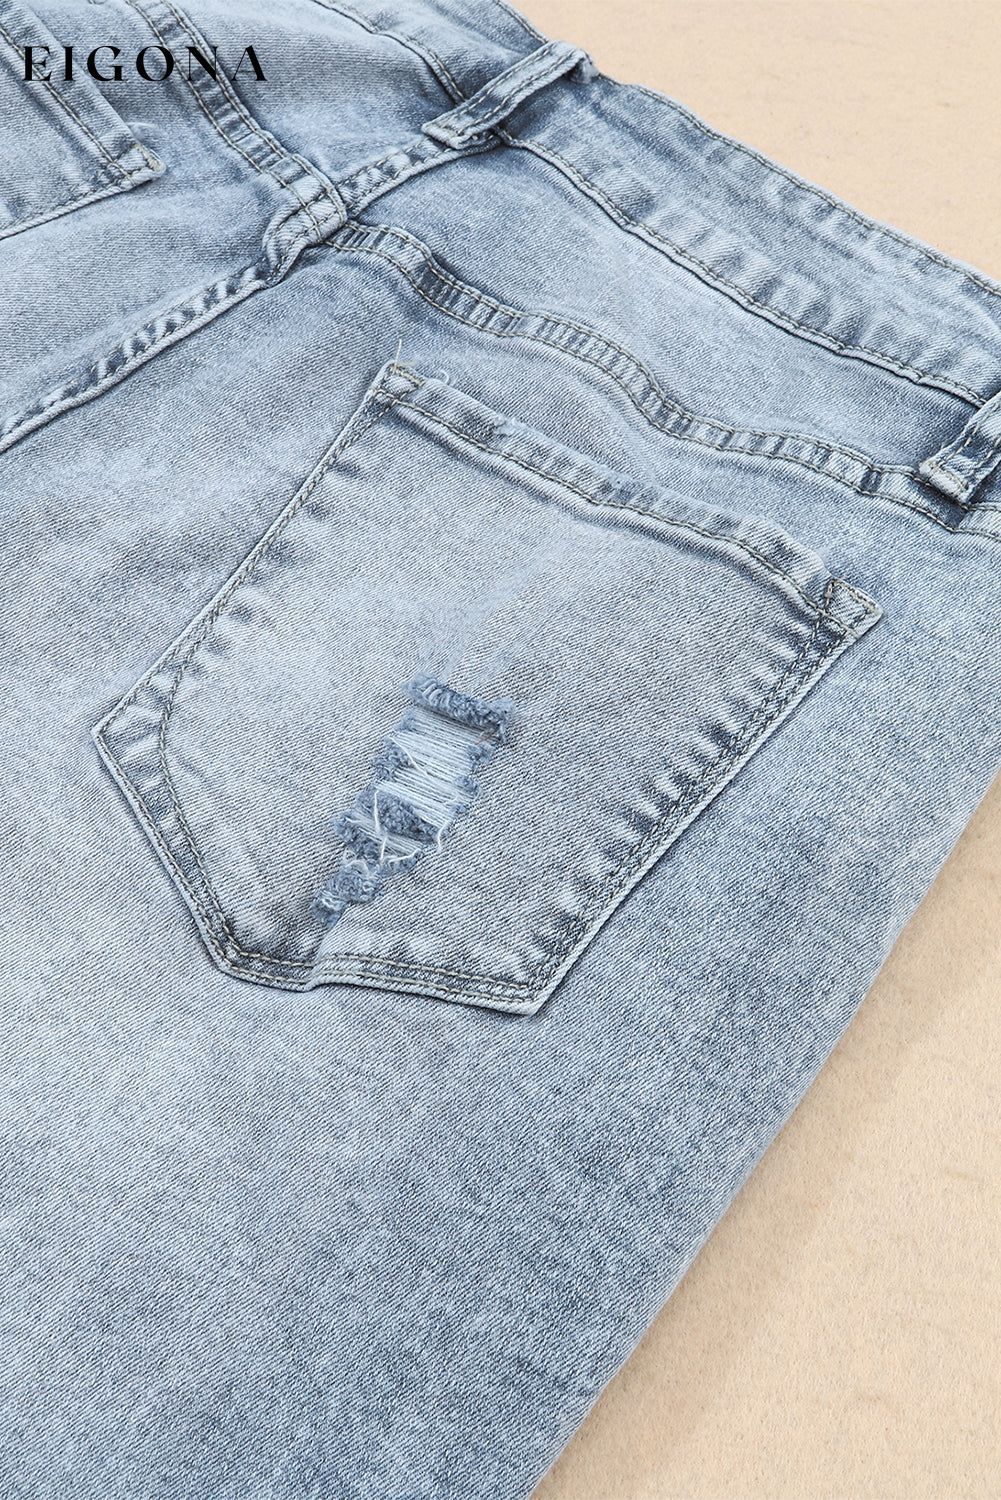 Sky Blue Light Wash Frayed Slim Fit High Waist Jeans All In Stock Best Sellers bottoms clothes Color Blue Craft Distressed Fabric Denim jeans pants ripped jeans Season Spring Style Western